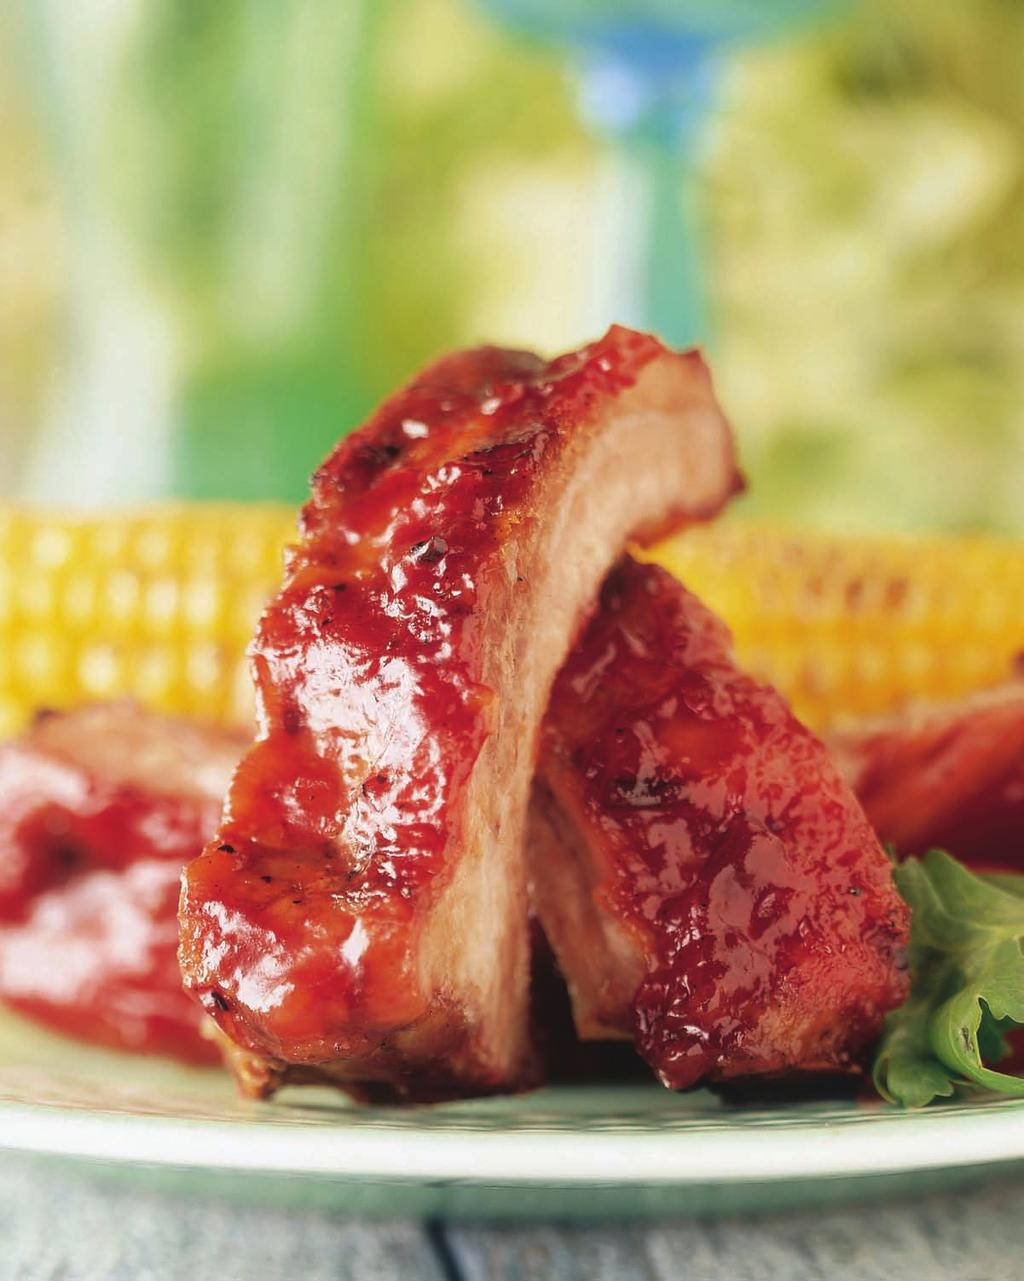 6 BABY BACK RIBS WITH SPICED APPLE-CIDER